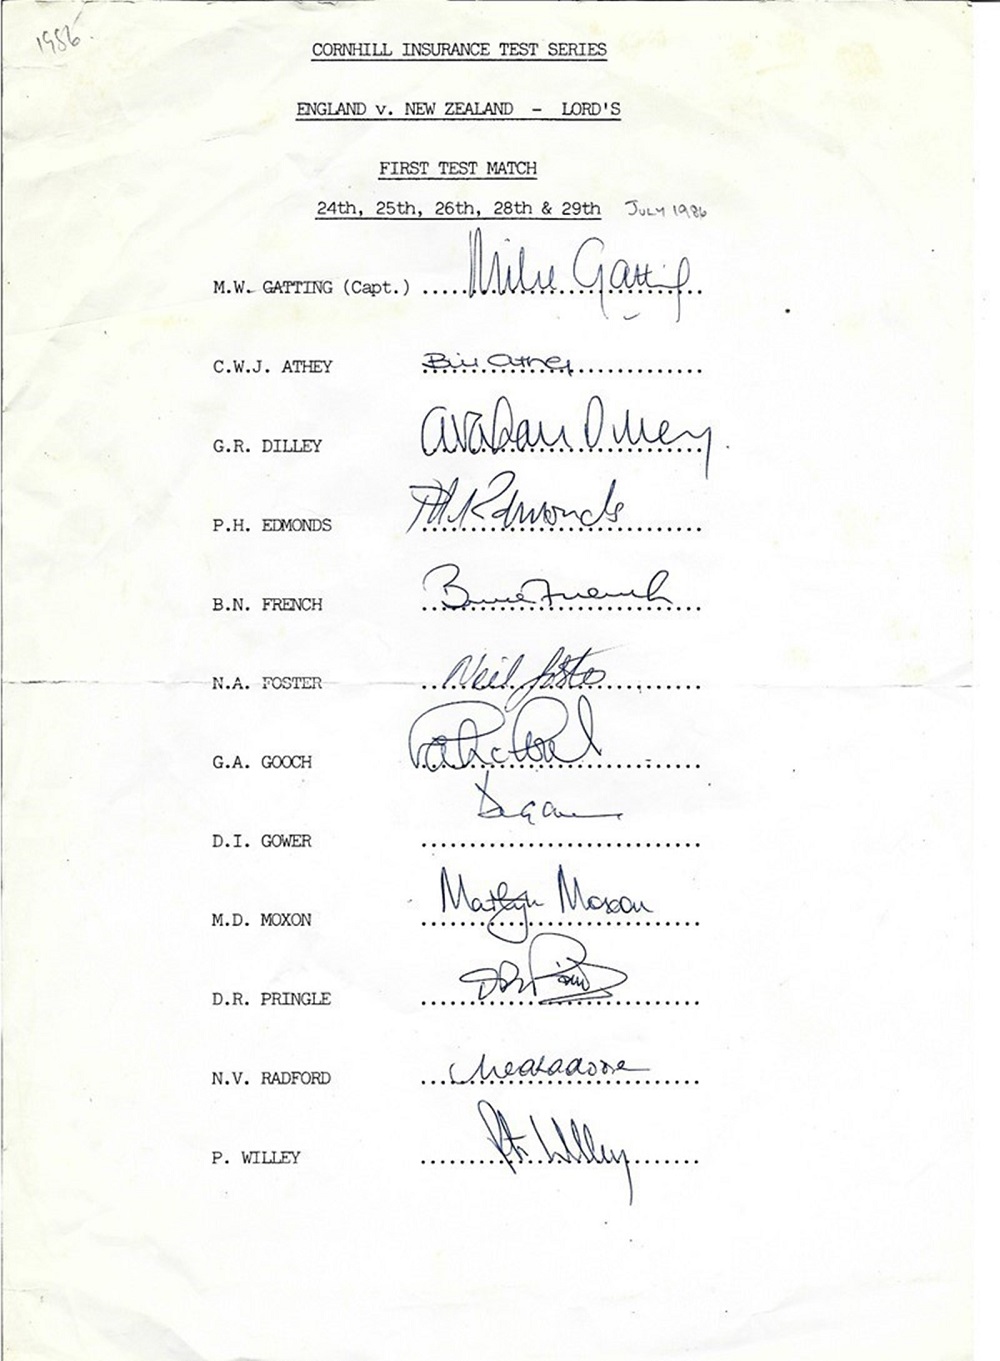 Cricket 1986 England multi signed Team Sheet for The Cornhill Insurance Test Series England v New Ze